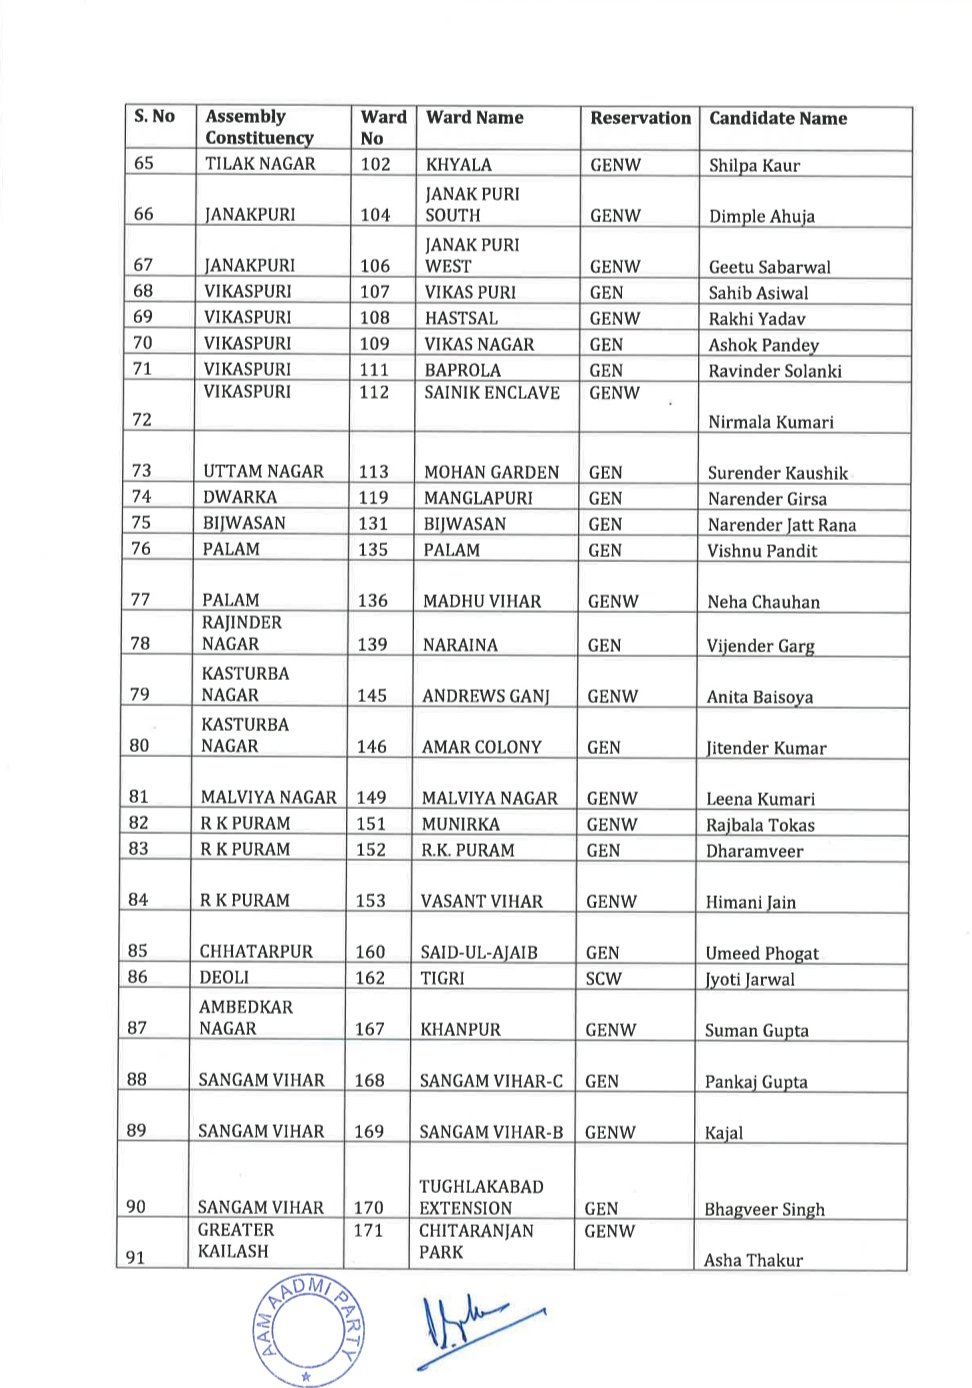 Aap Candidates list mcd 2022 elections